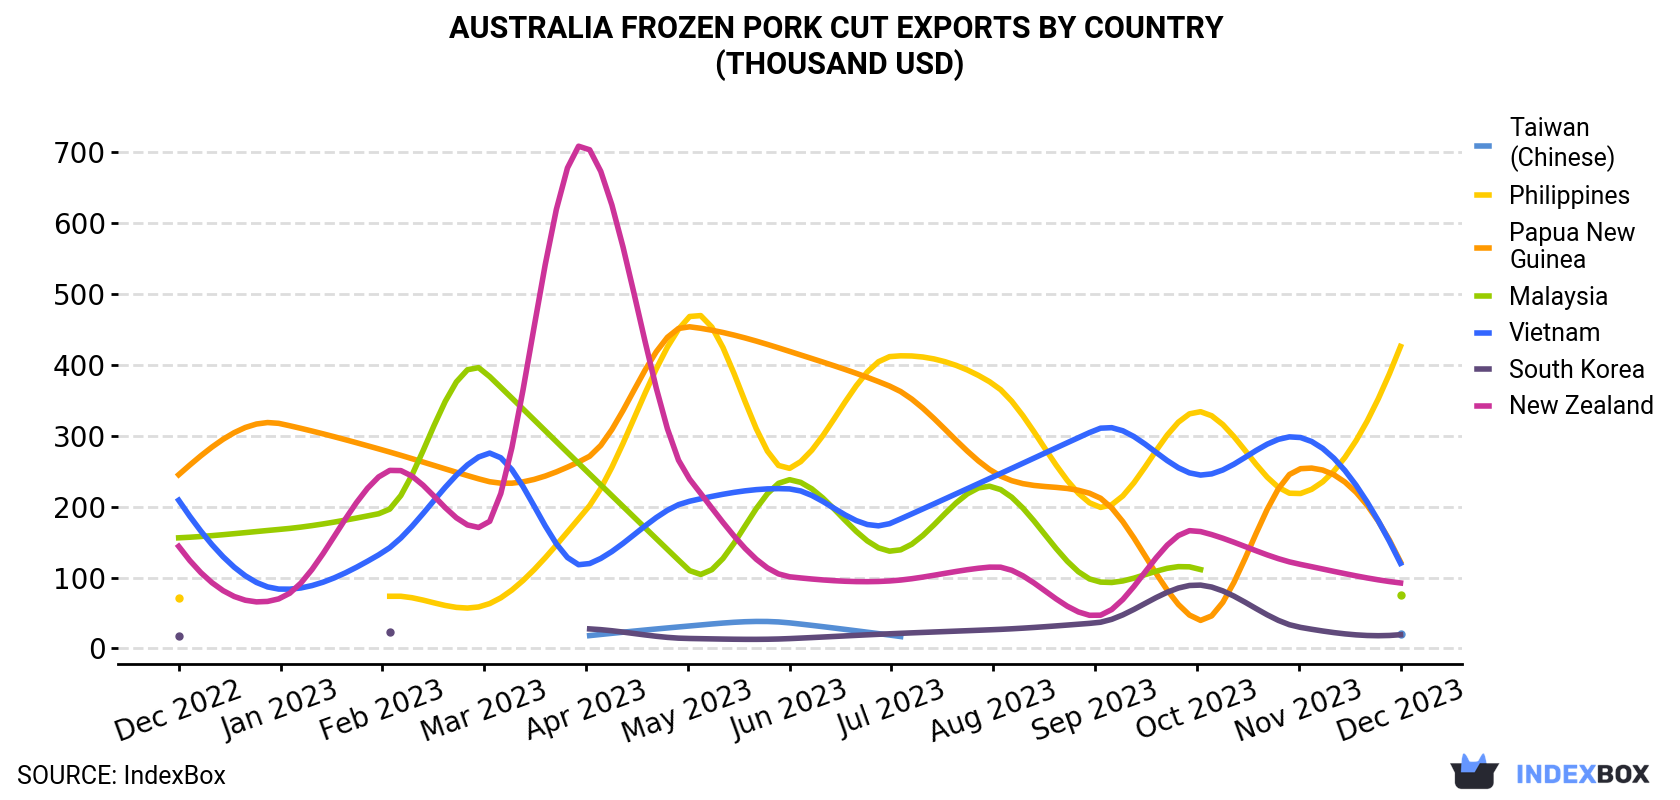 Australia Frozen Pork Cut Exports By Country (Thousand USD)